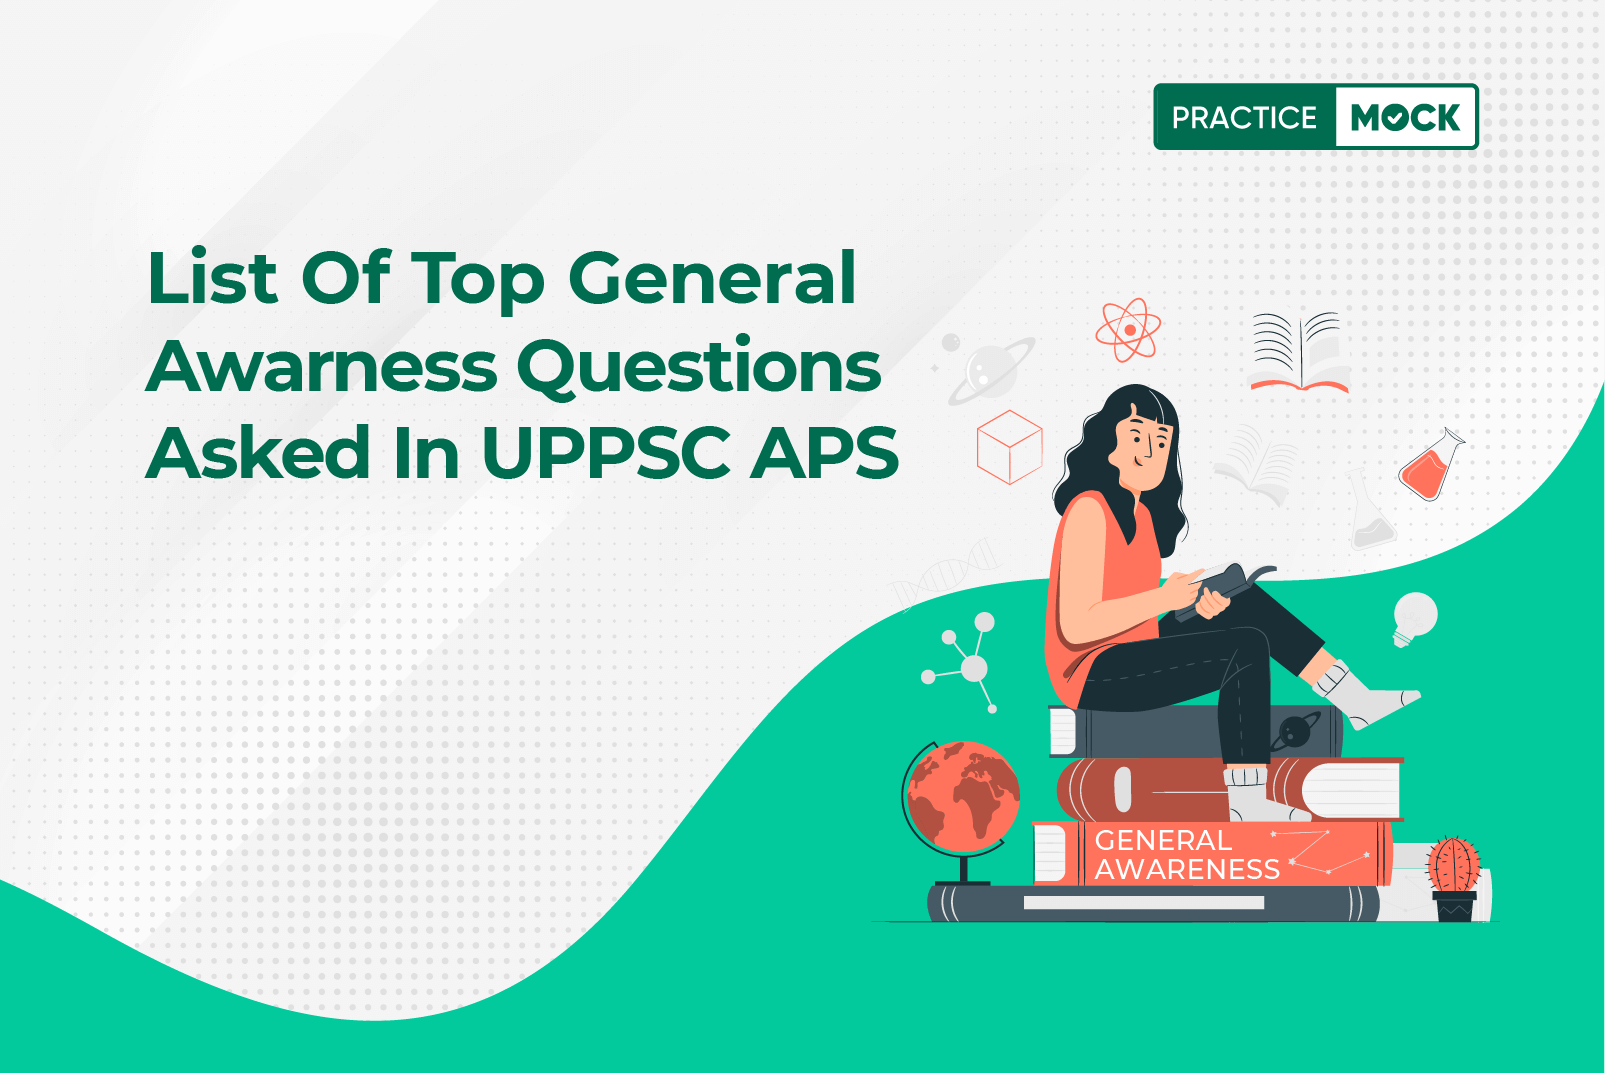 List Of Top General Awareness Questions Asked In UPPSC APS